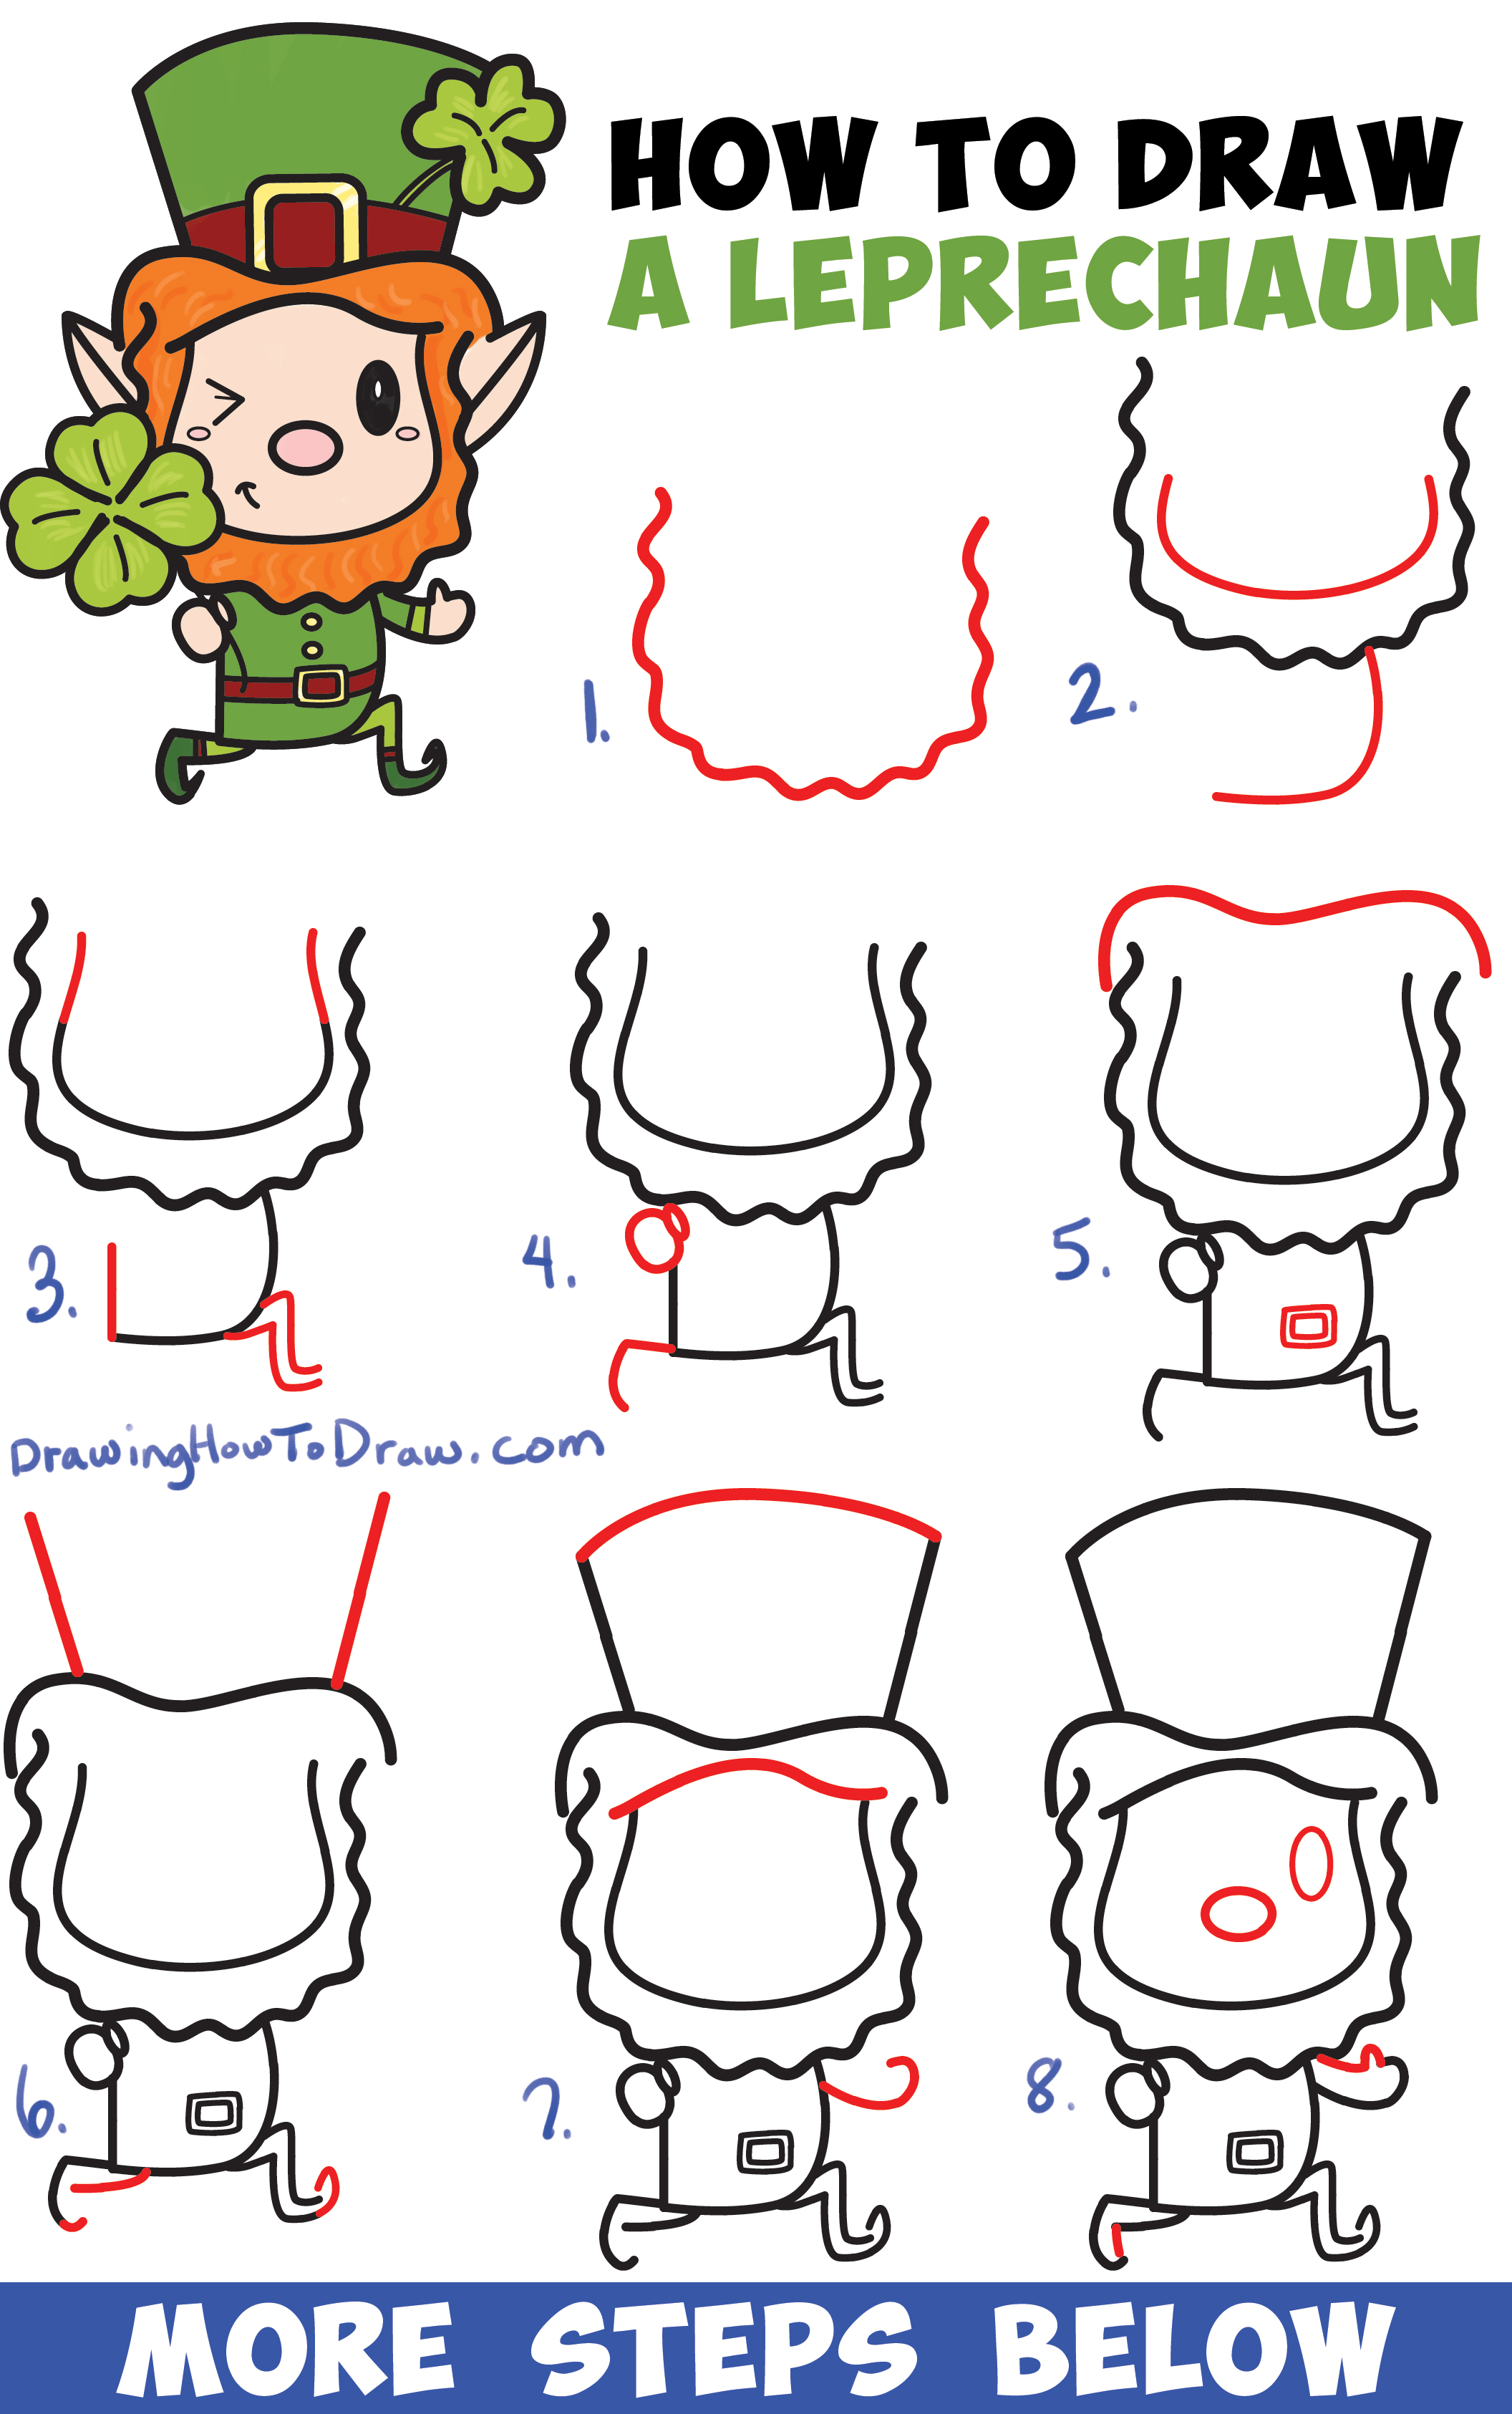 How to Draw a Cute Cartoon Leprechaun for Saint Patrick's Day Easy Step by Step Drawing Tutorial for Kids